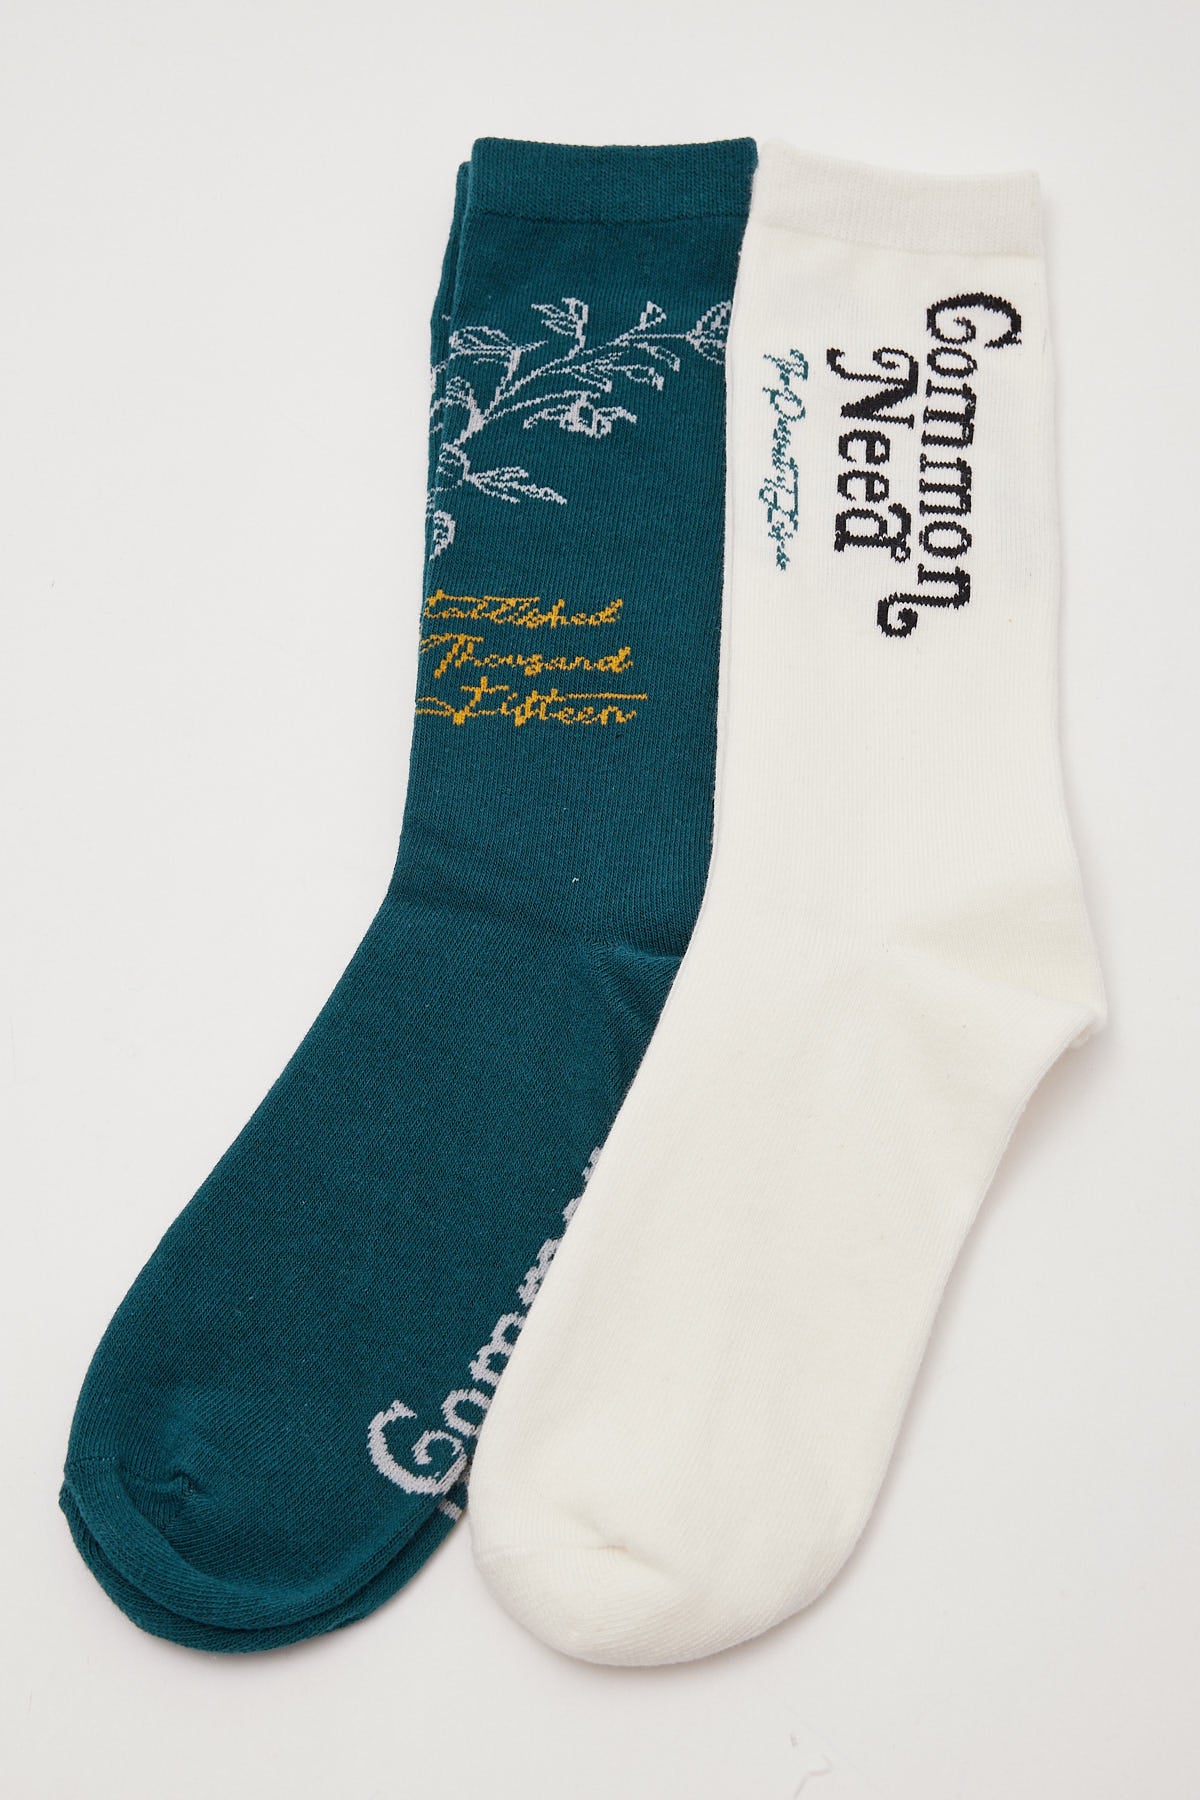 Common Need Estate Sock 2 Pack Teal/White